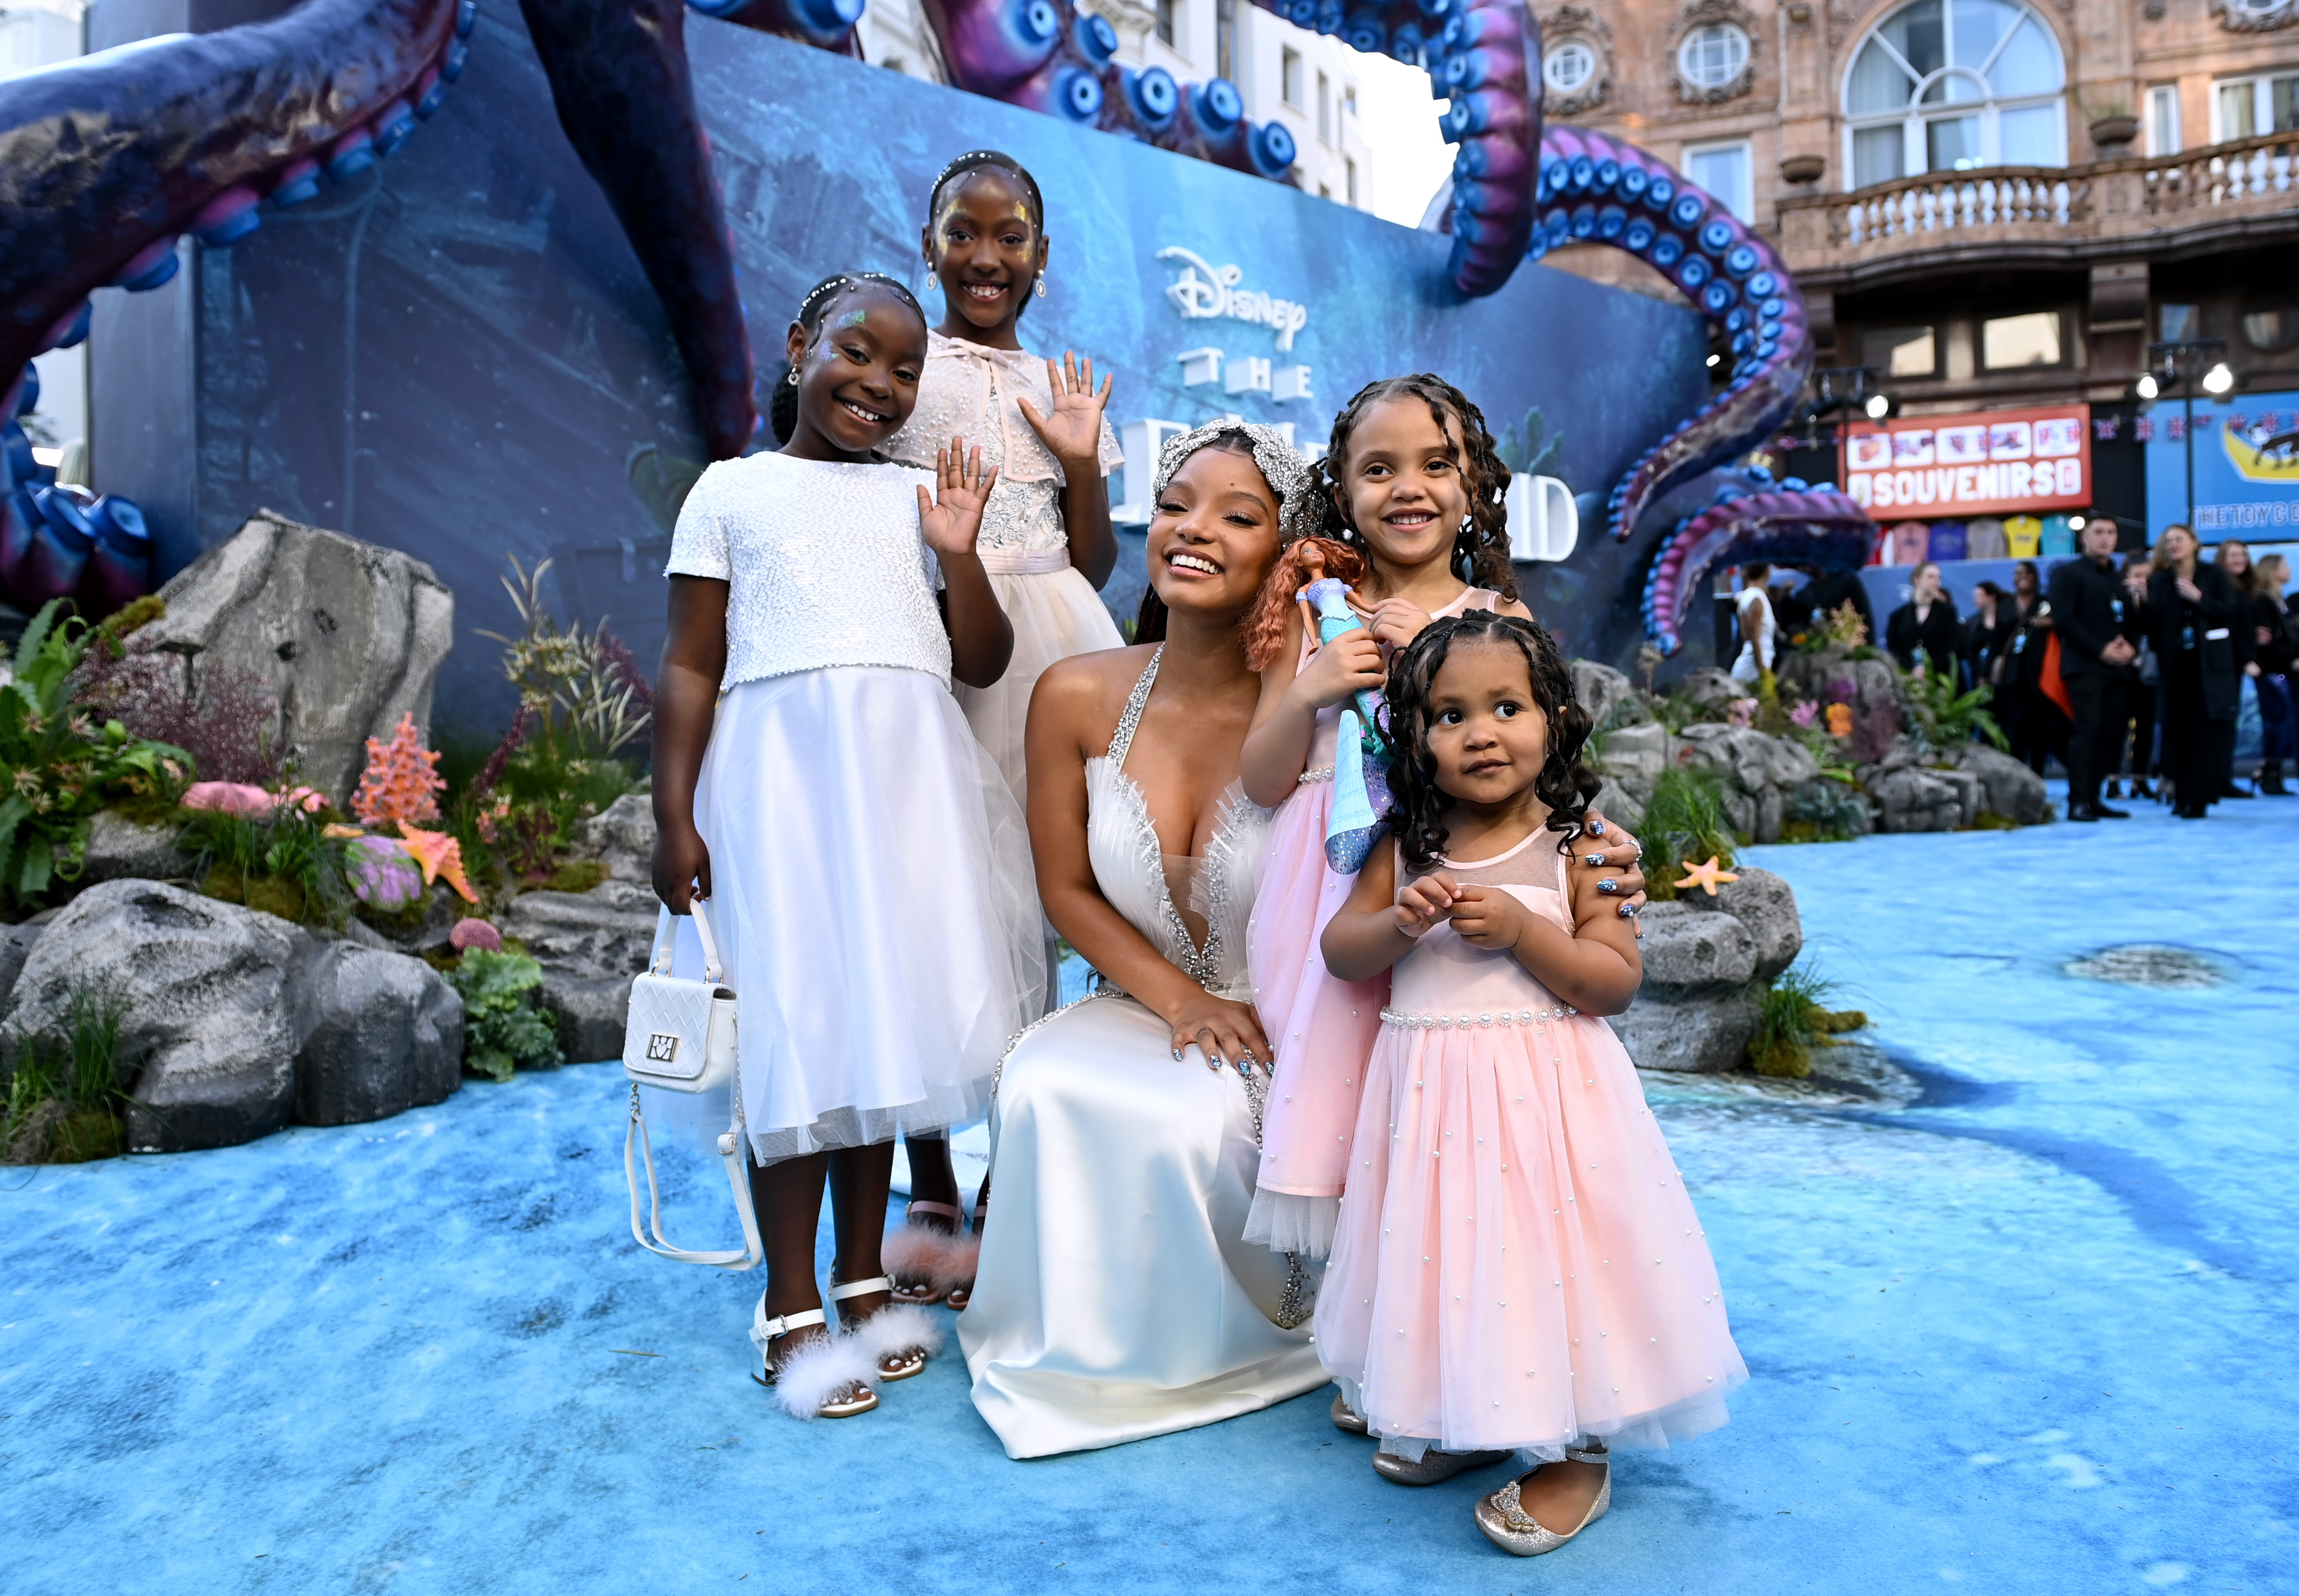 Halle Bailey with young fans at the UK Premiere of Disney's "The Little Mermaid" on May 15, 2023 in London, England. (Photo by Kate Green/Getty Images for Disney)